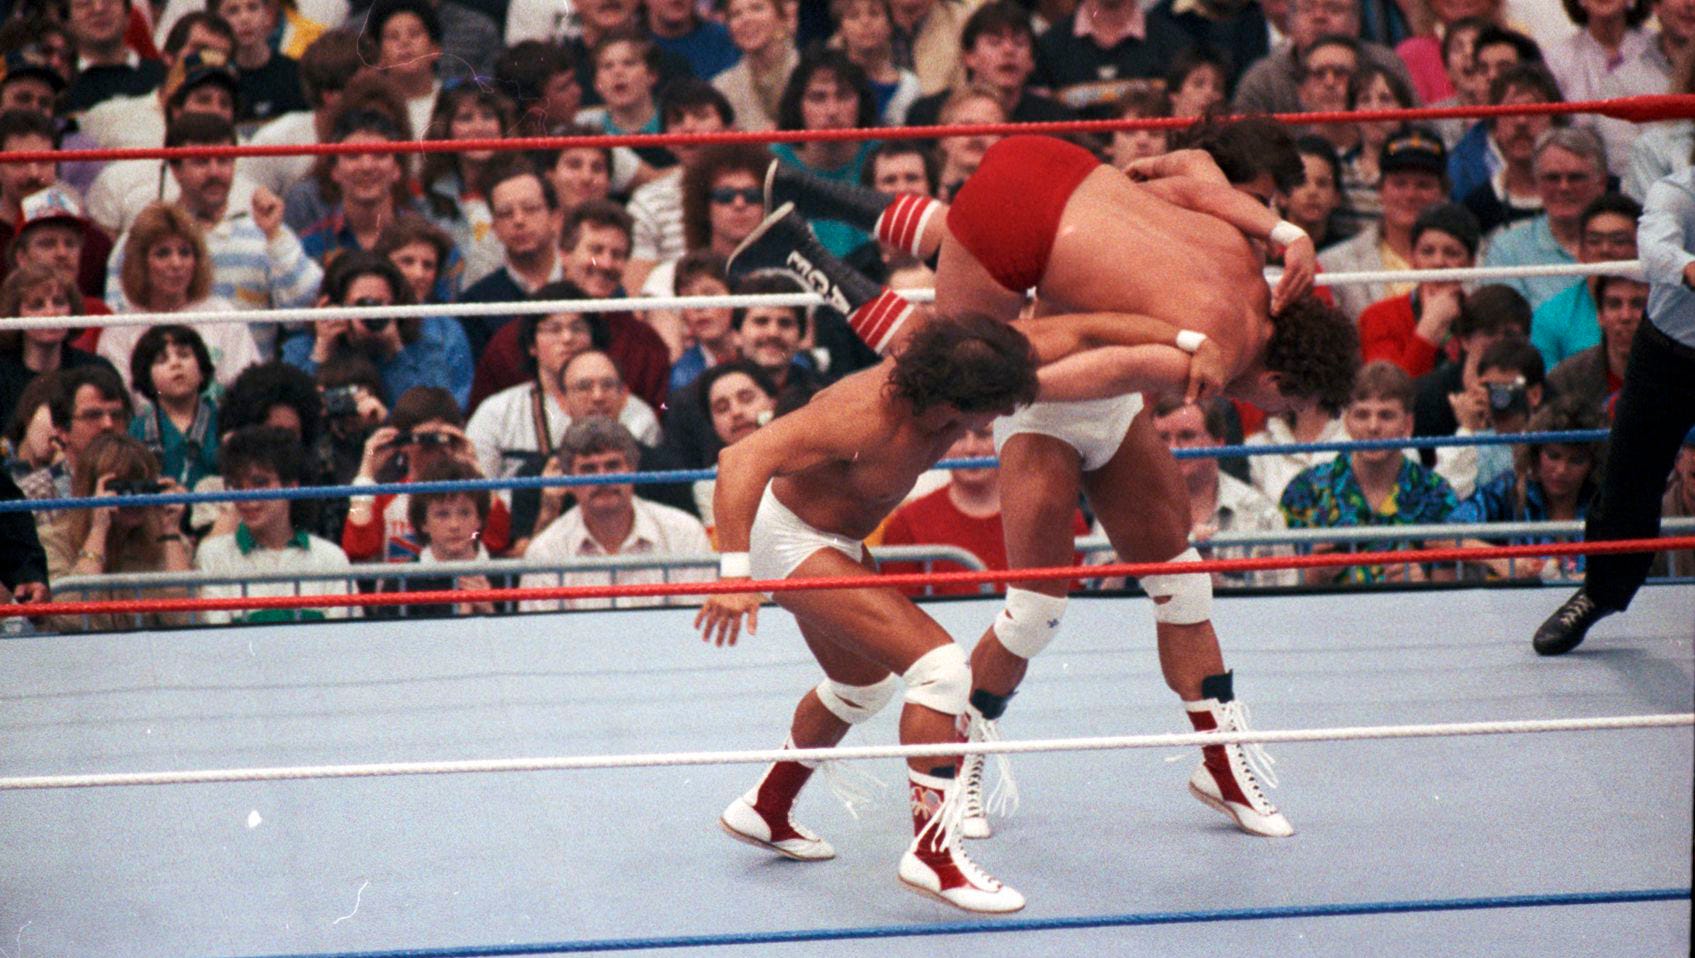 The Can-Am Connection of Rick Martel and Tom Zenk take on Bob Orton and Don Muraco in the spectacle's opening match.